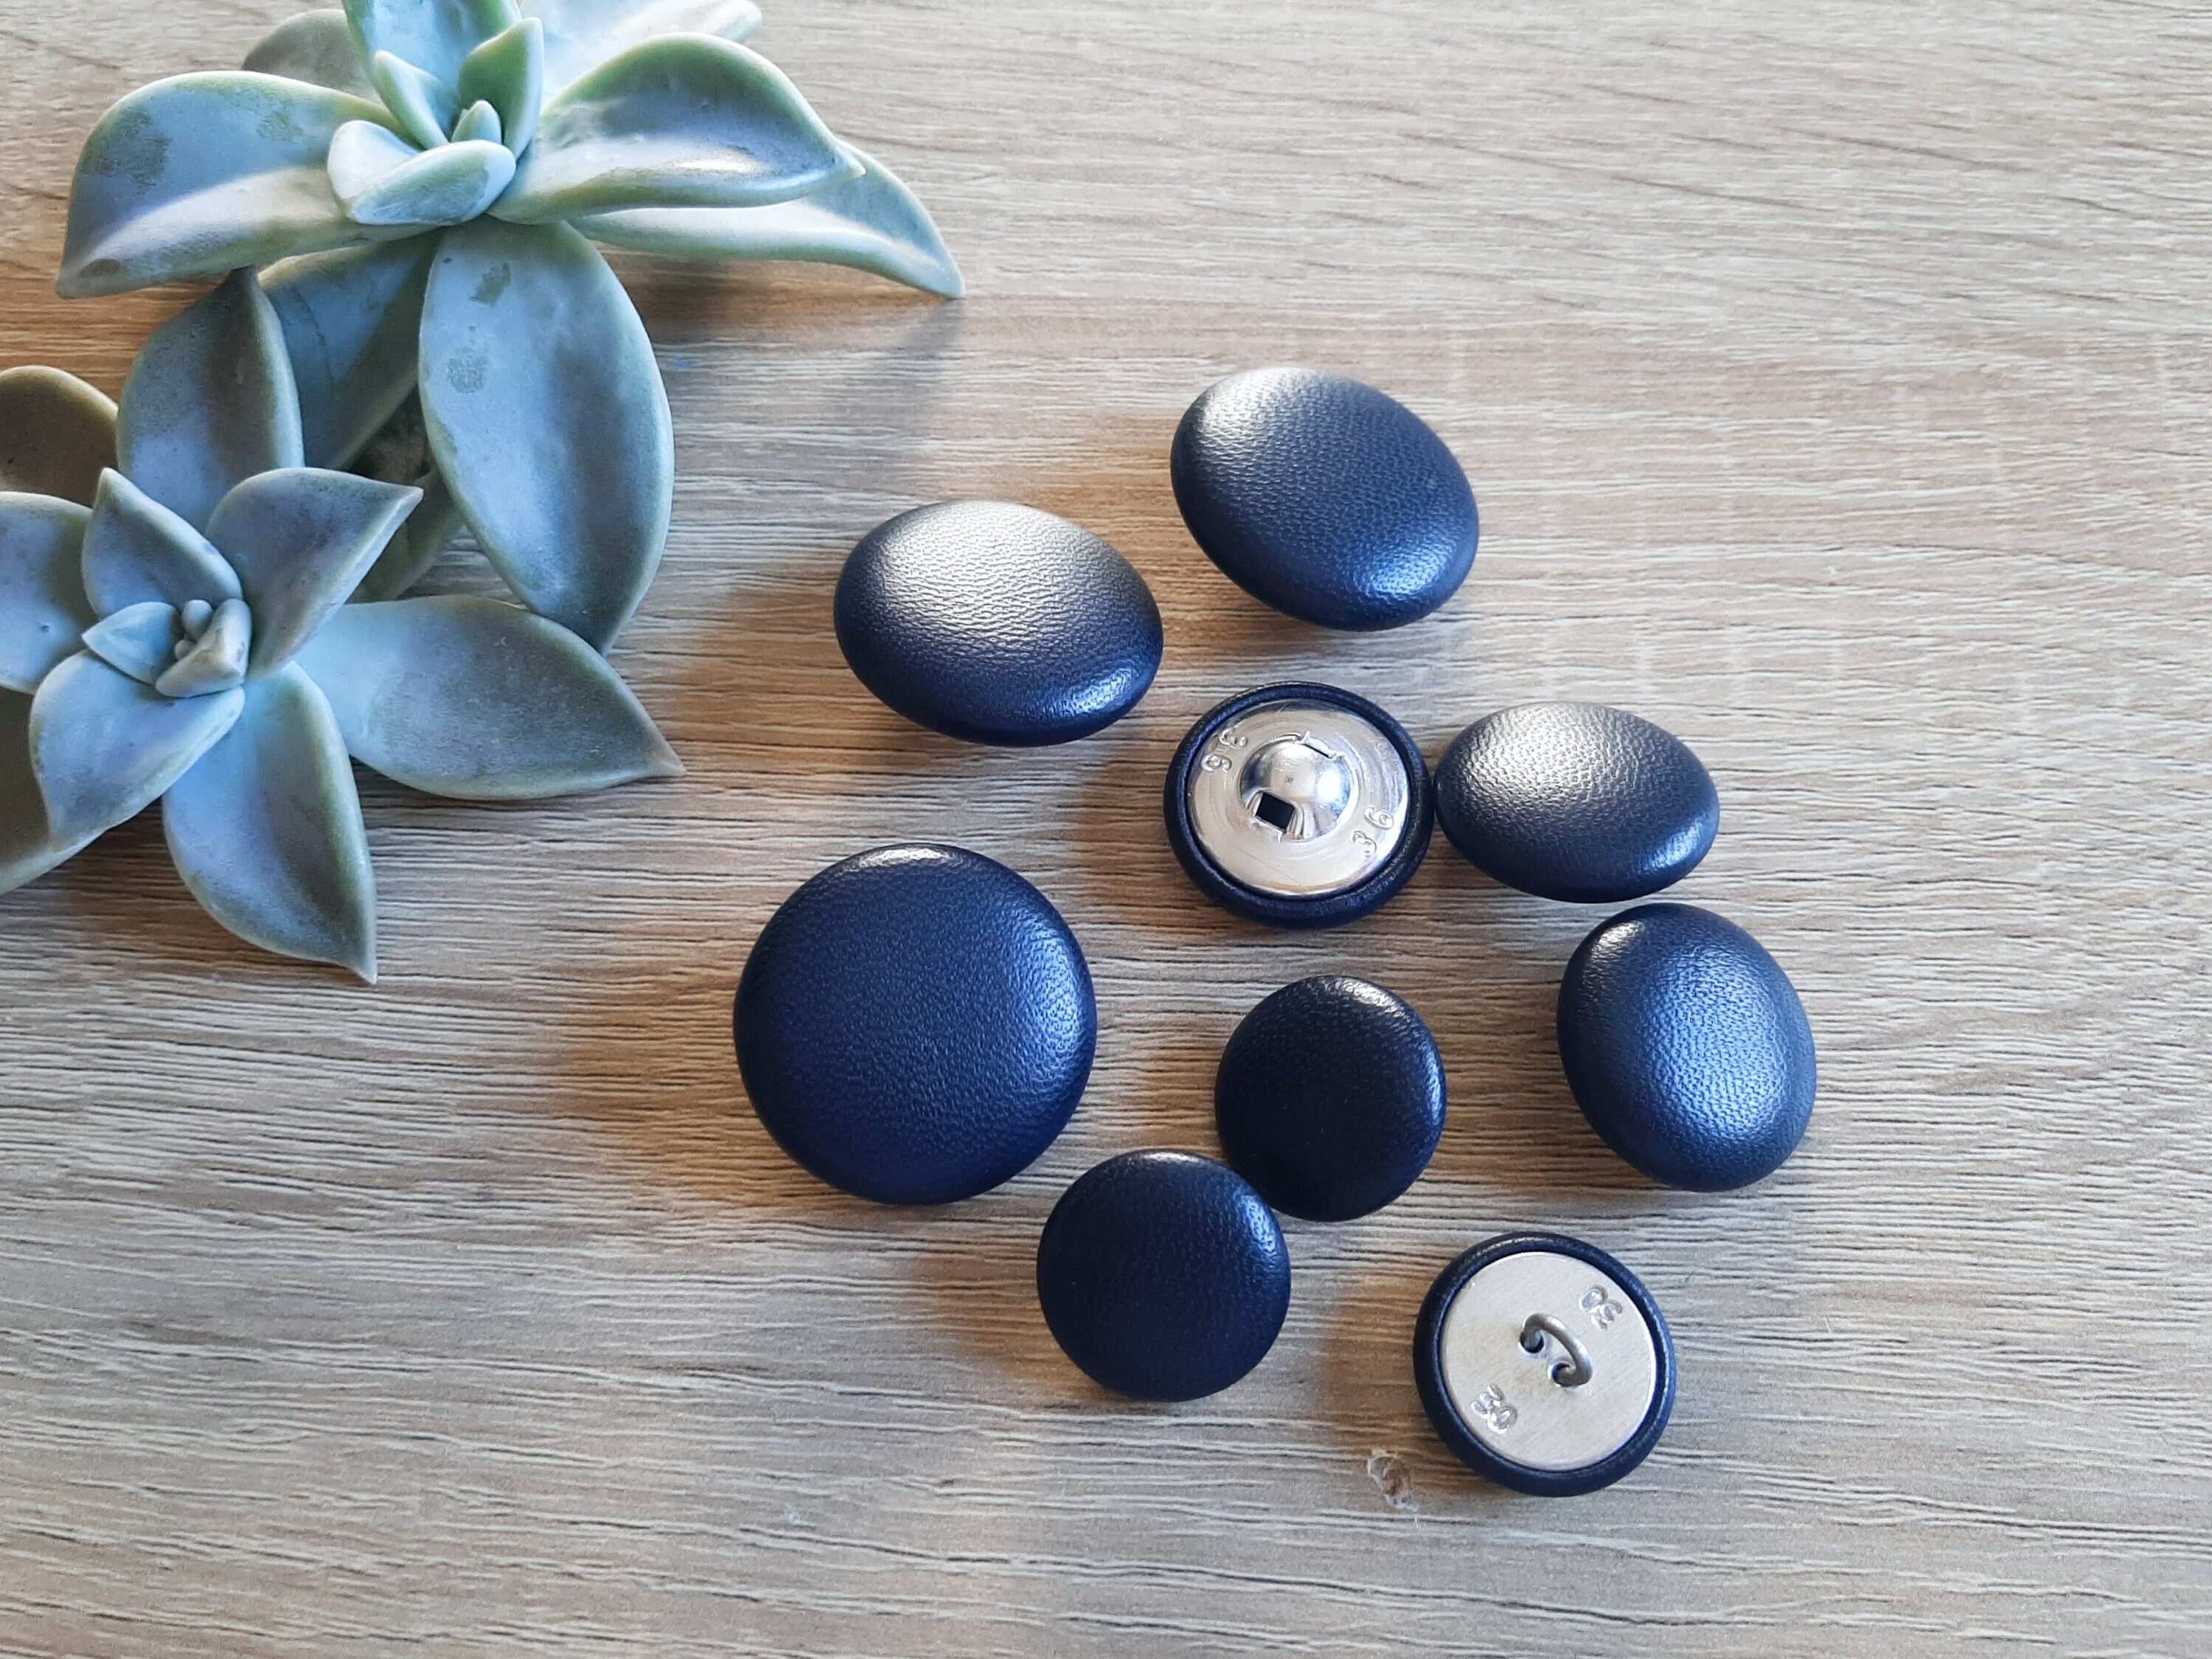 Blue Leather Buttons / Leather Shank Style Blue Buttons / 30L 36L 44L /  Genuine Leather 